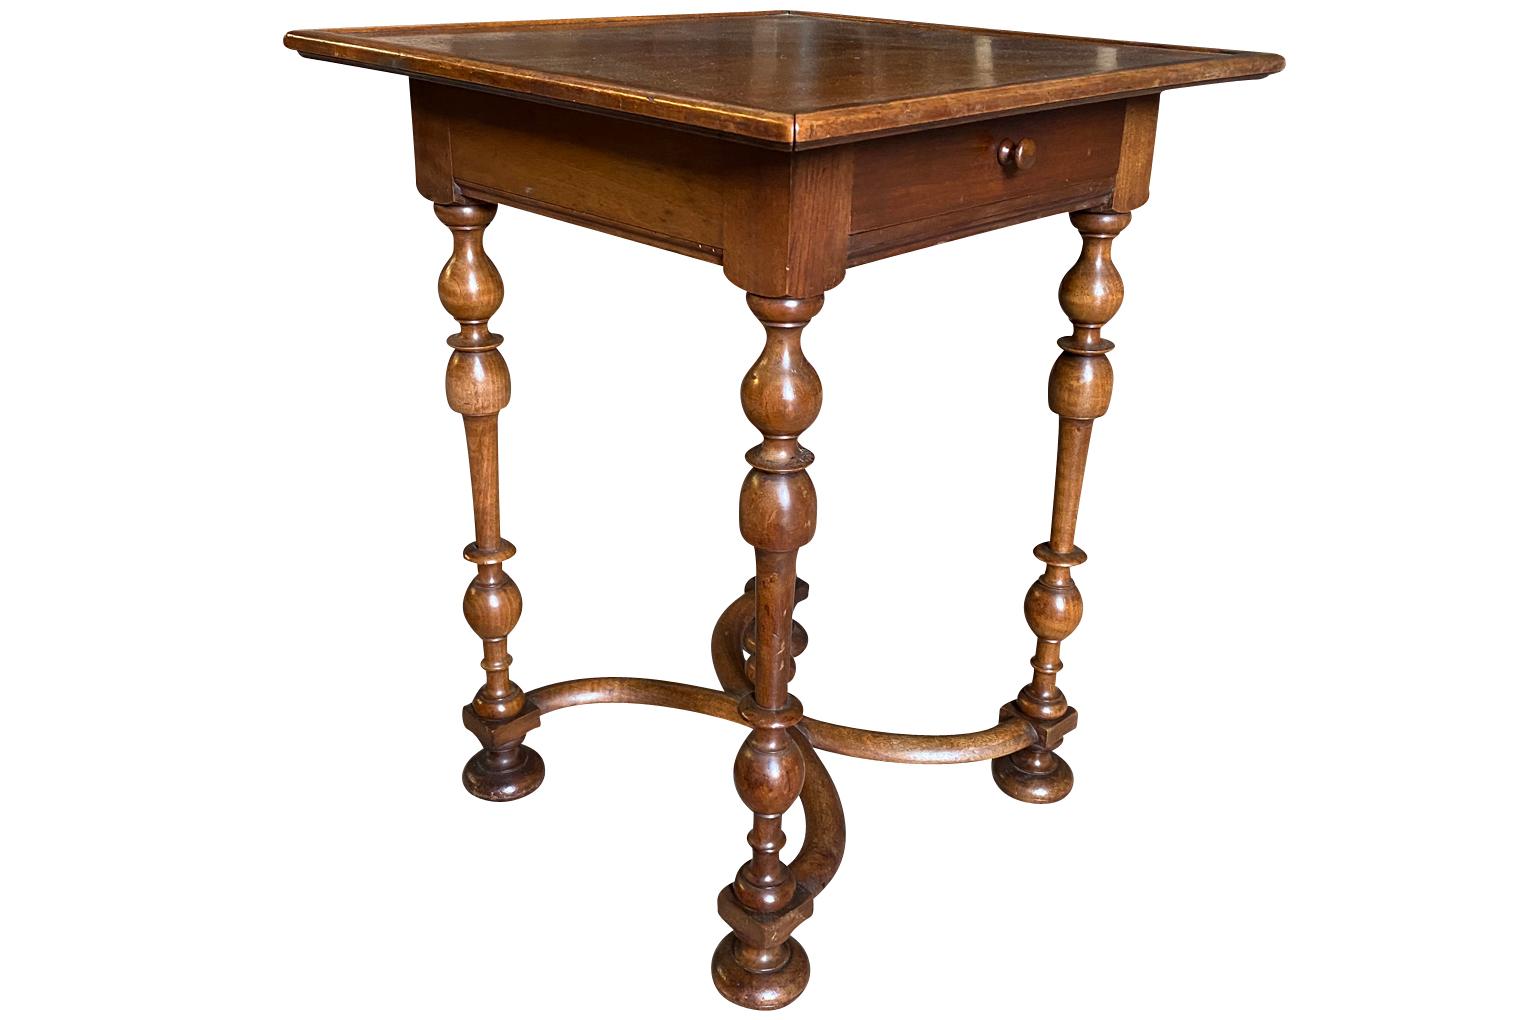 A very lovely later 19th century Louis XIII side table beautifully constructed from walnut with a single drawer and wonderfully turned legs. Very rich patina.